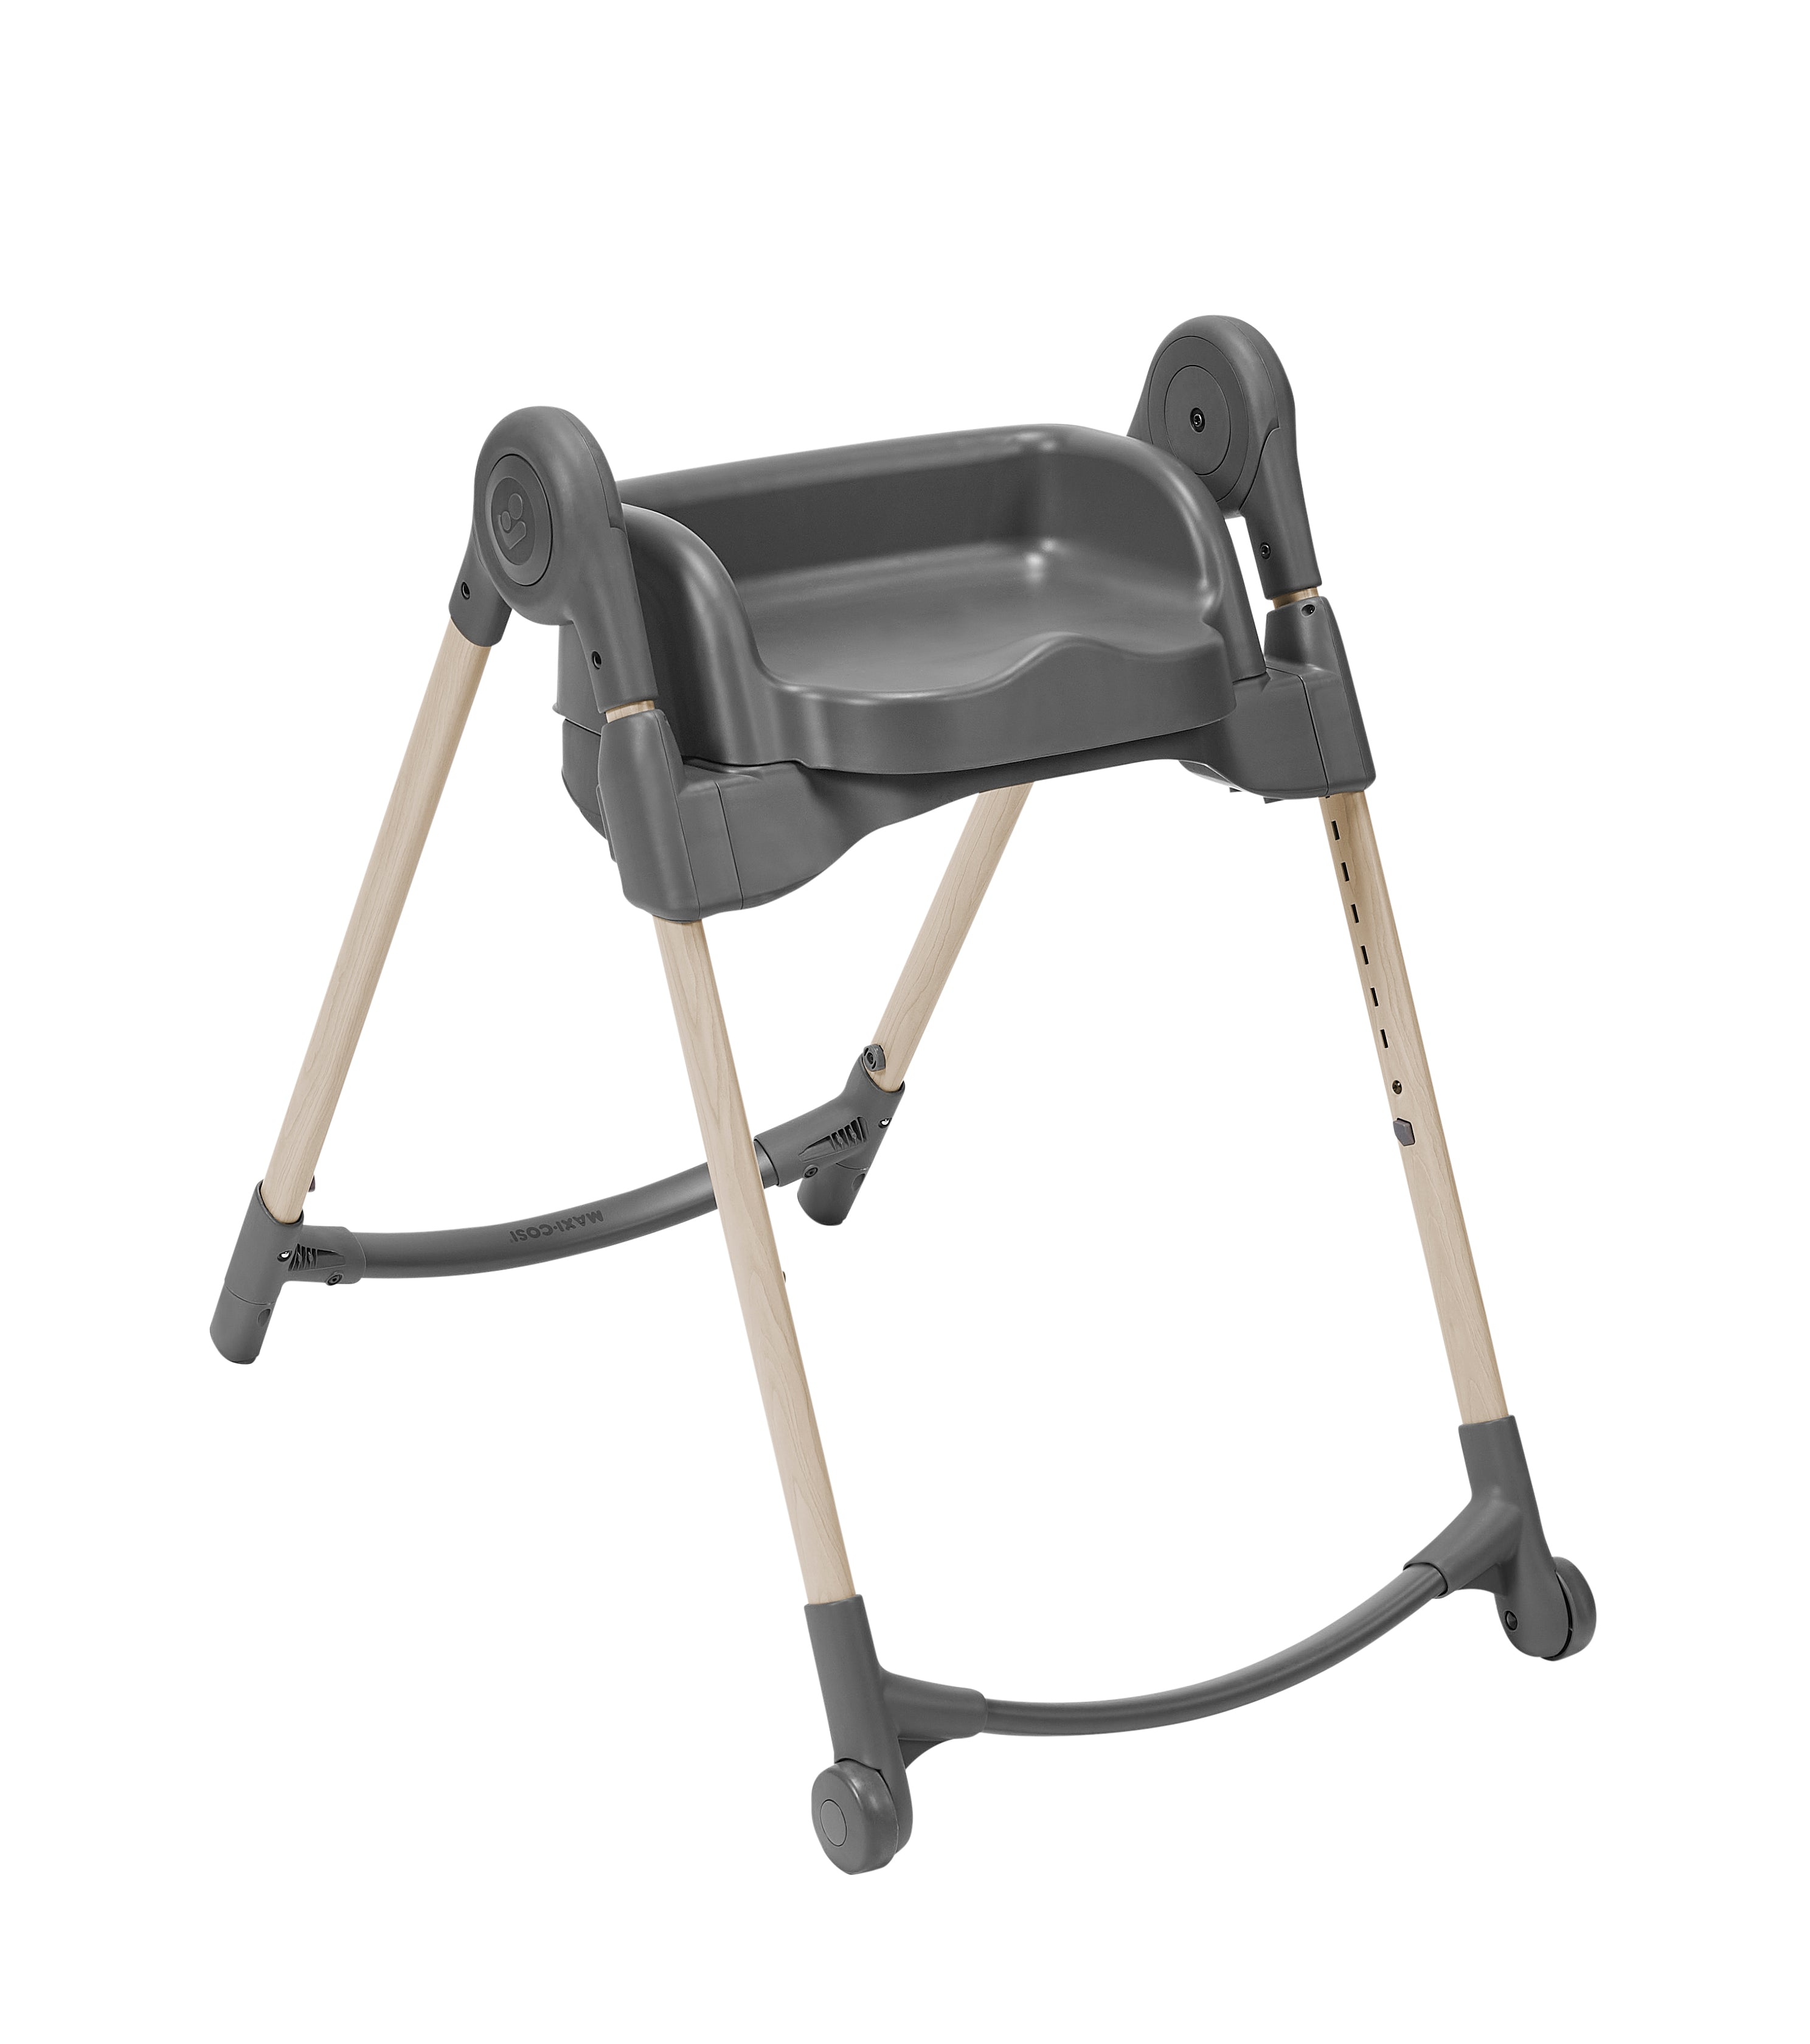 Maxi-Cosi 6-in-1 Minla High Chair - Essential Grey/Essential Graphite (Online Exclusive)